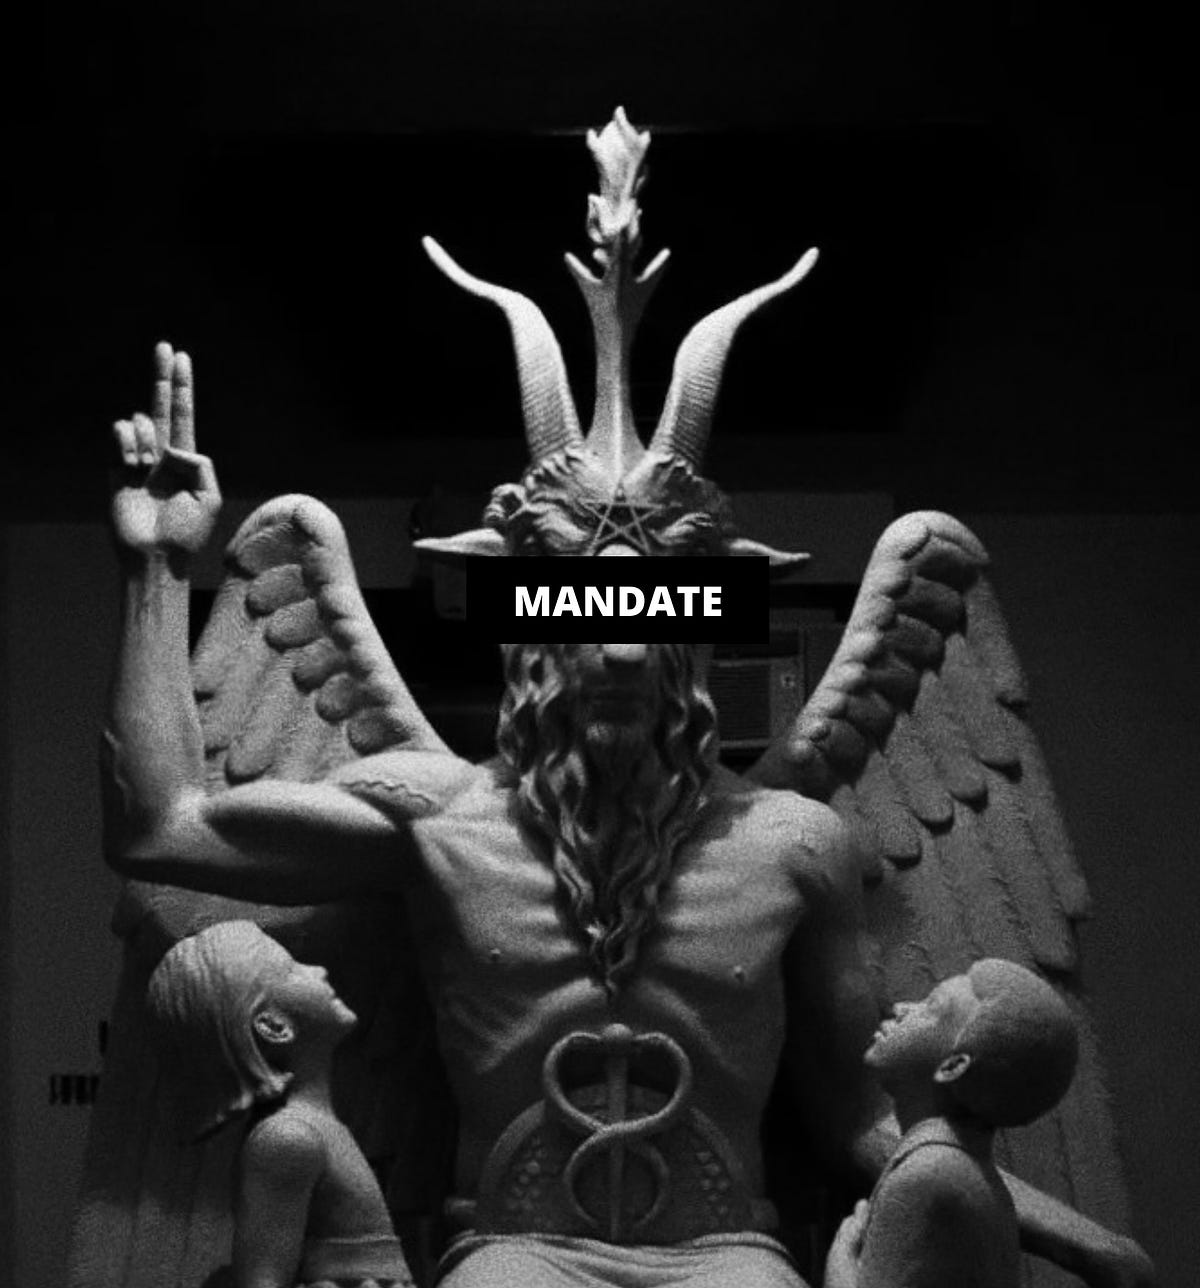 Mandate 666. Do Not Comply!